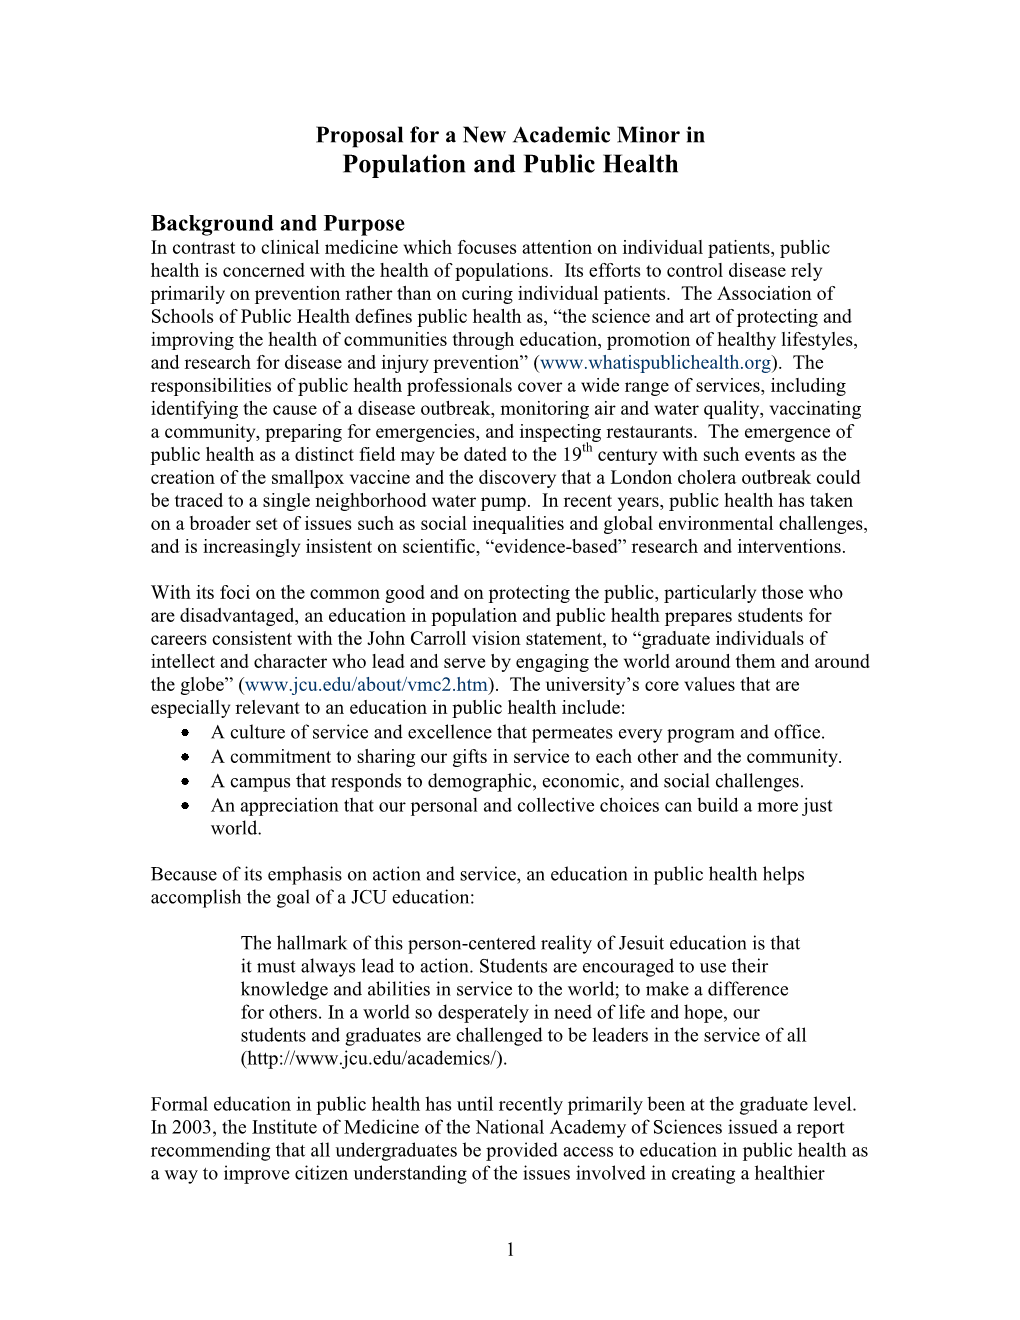 Proposal for a New Academic Minor in Population and Public Health